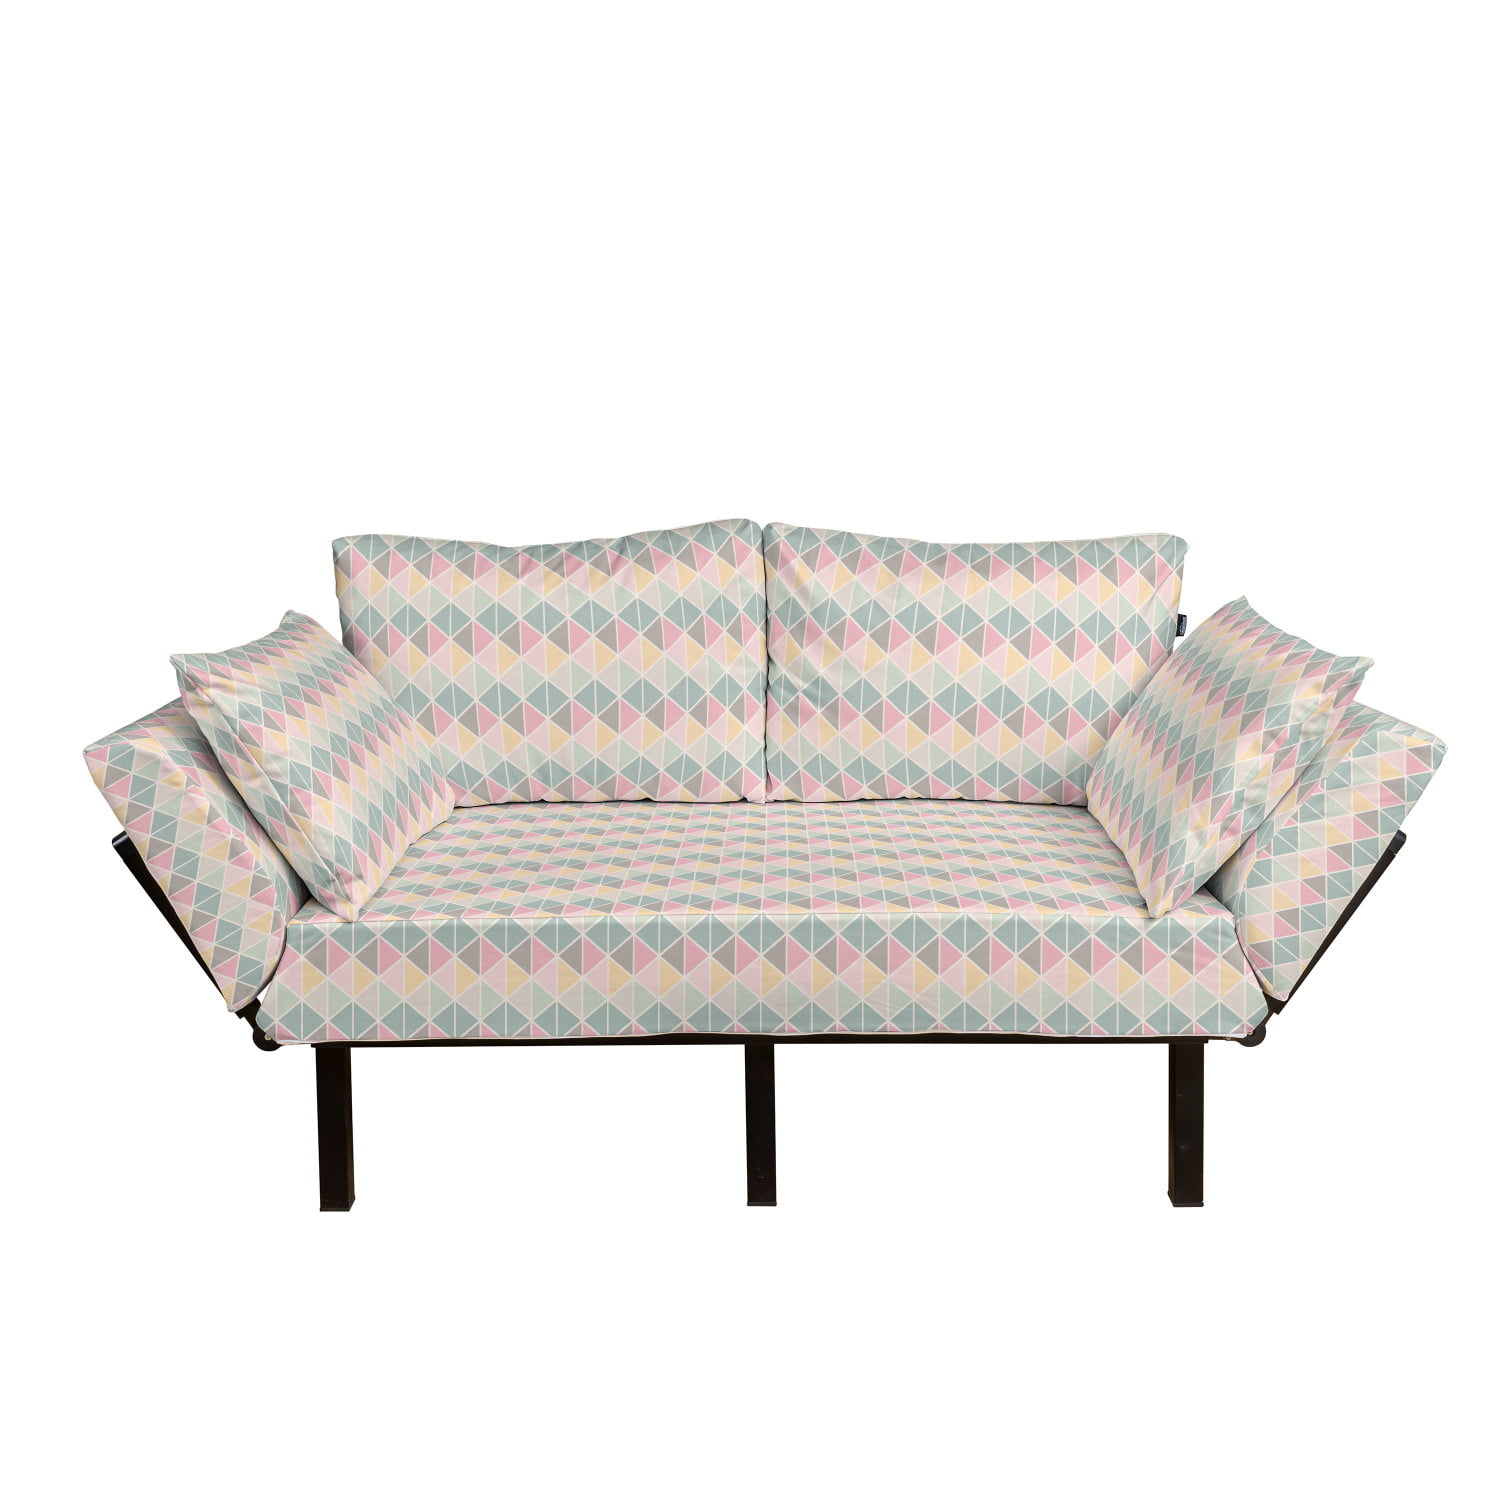 Loveseat Ambesonne Cactus Futon Couch Vintage Inspired Watercolor Pattern Latin American Foliage Peyote Design Elements Multicolor Daybed with Metal Frame Upholstered Sofa for Living Dorm